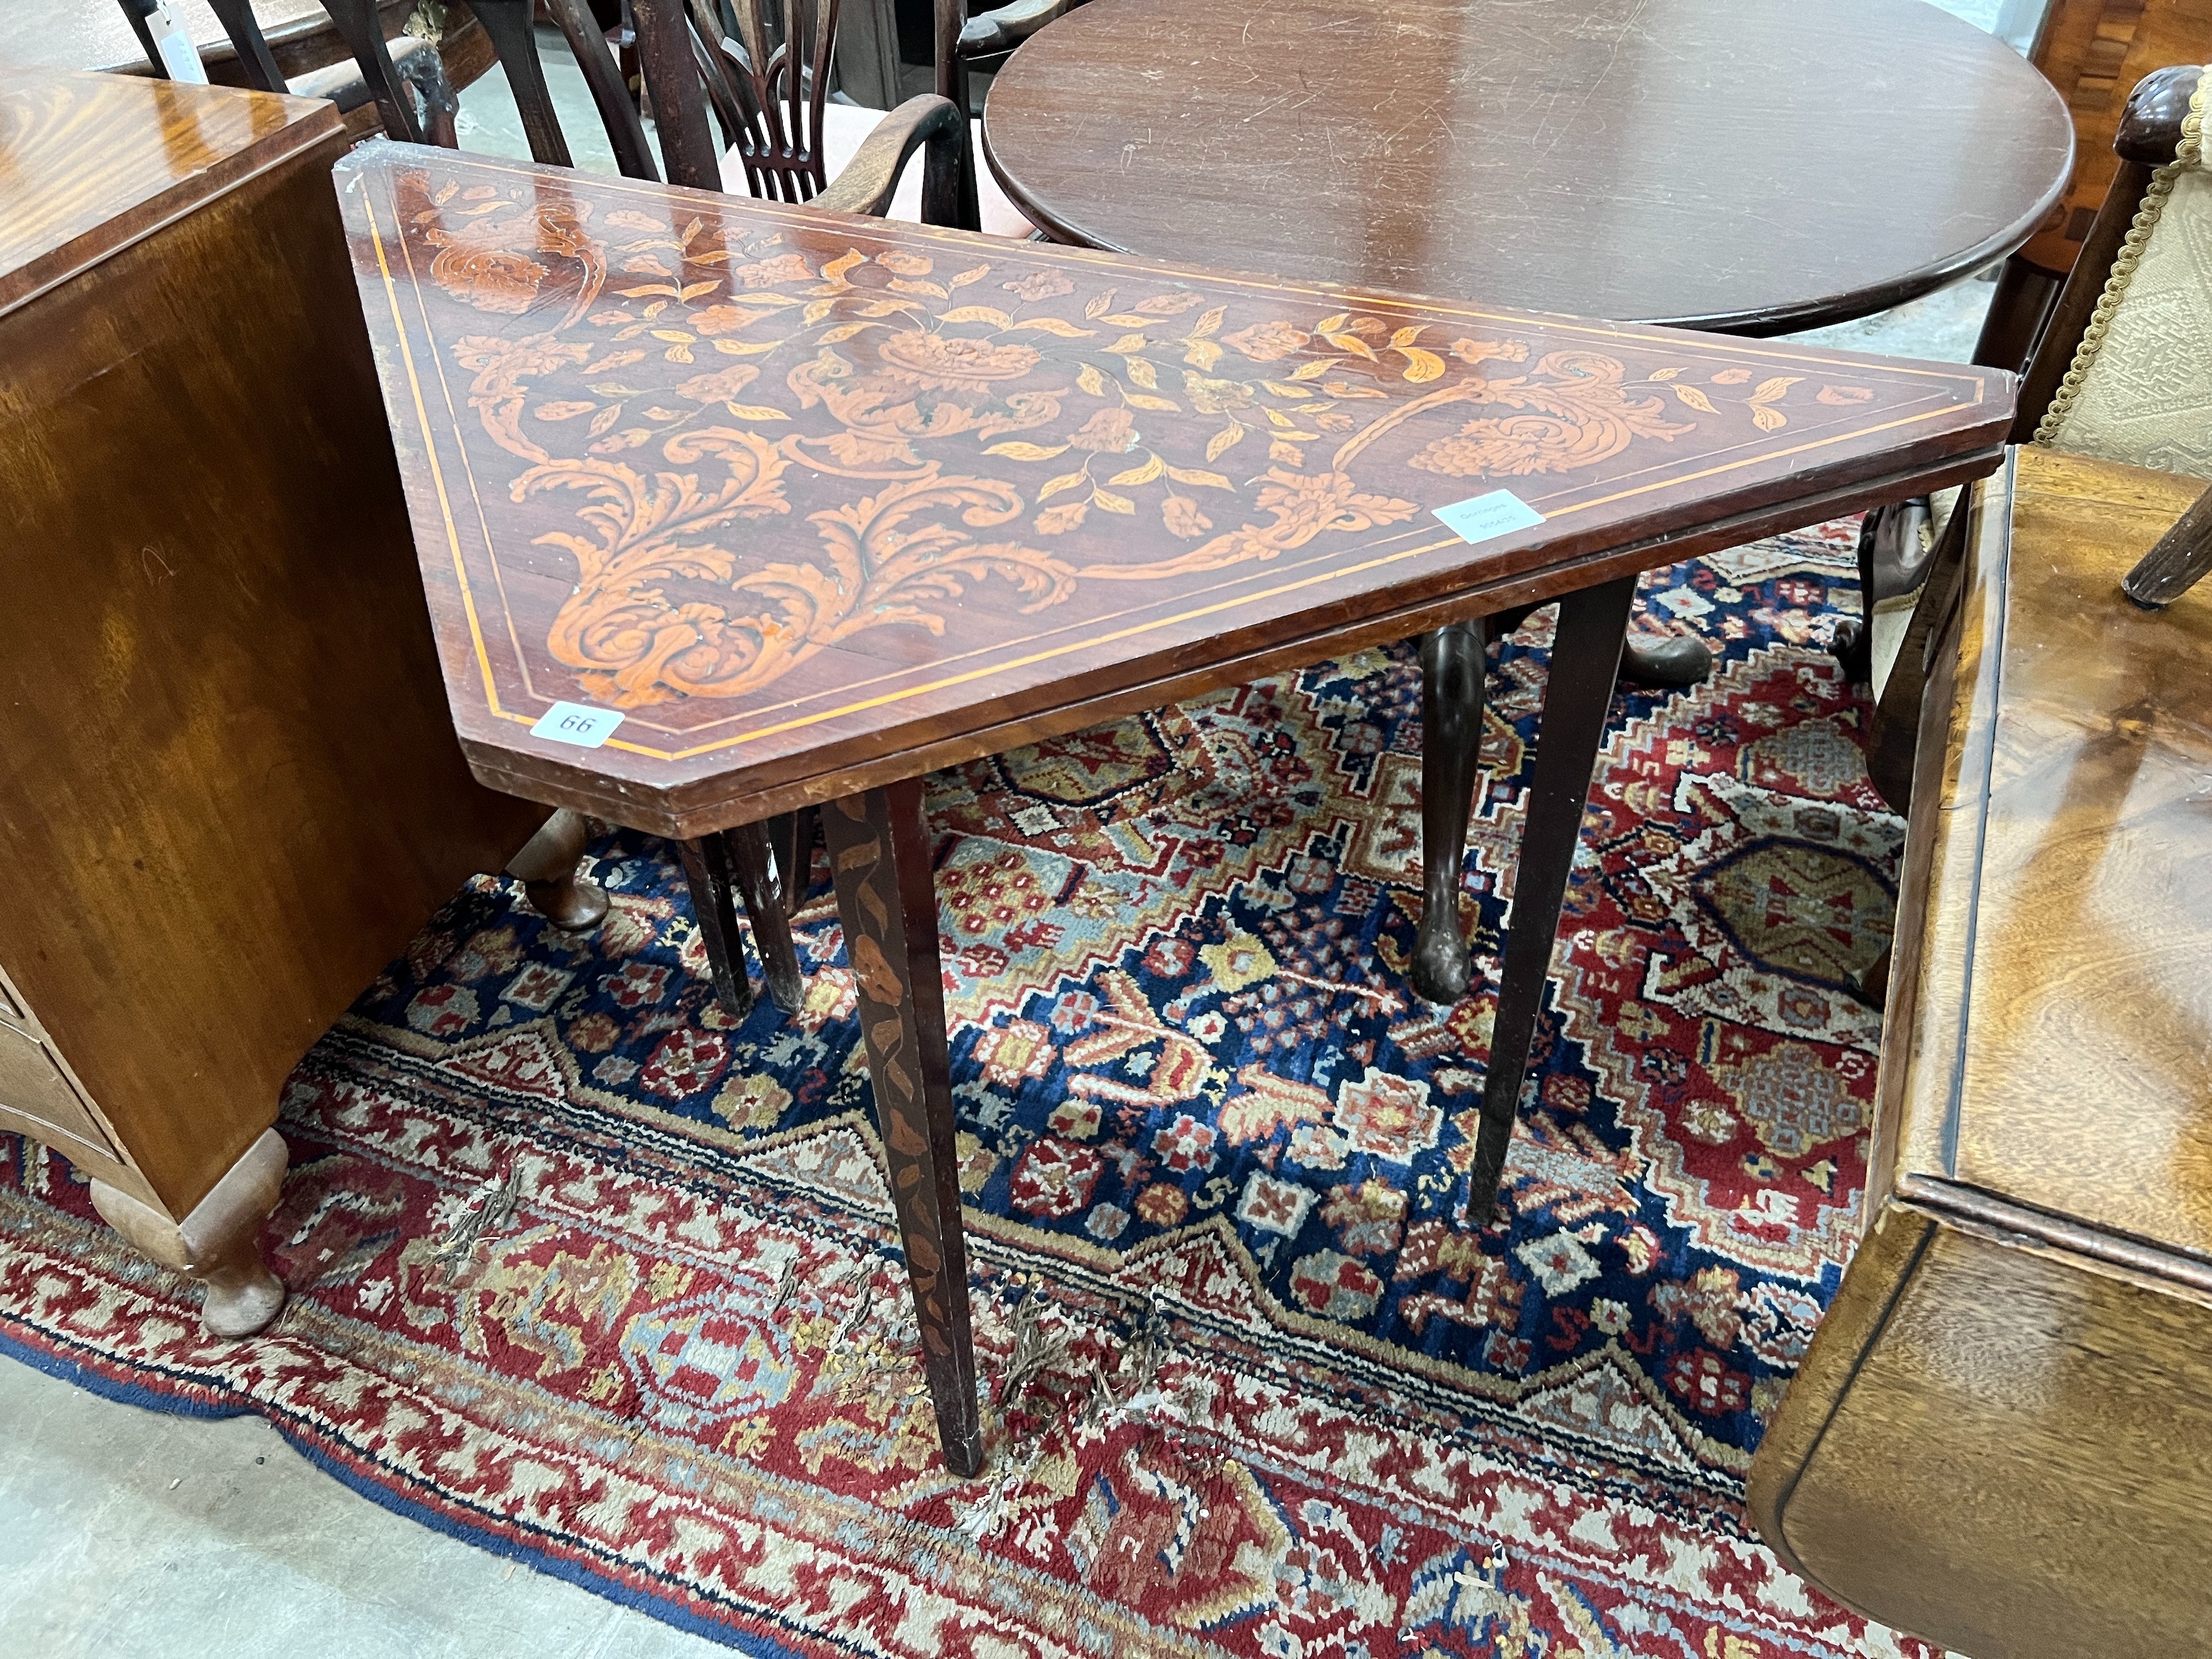 A 19th century Dutch mahogany and floral marquetry inlaid walnut folding card table, width 104cm, depth 52cm, height 77cm *Please note the sale commences at 9am.